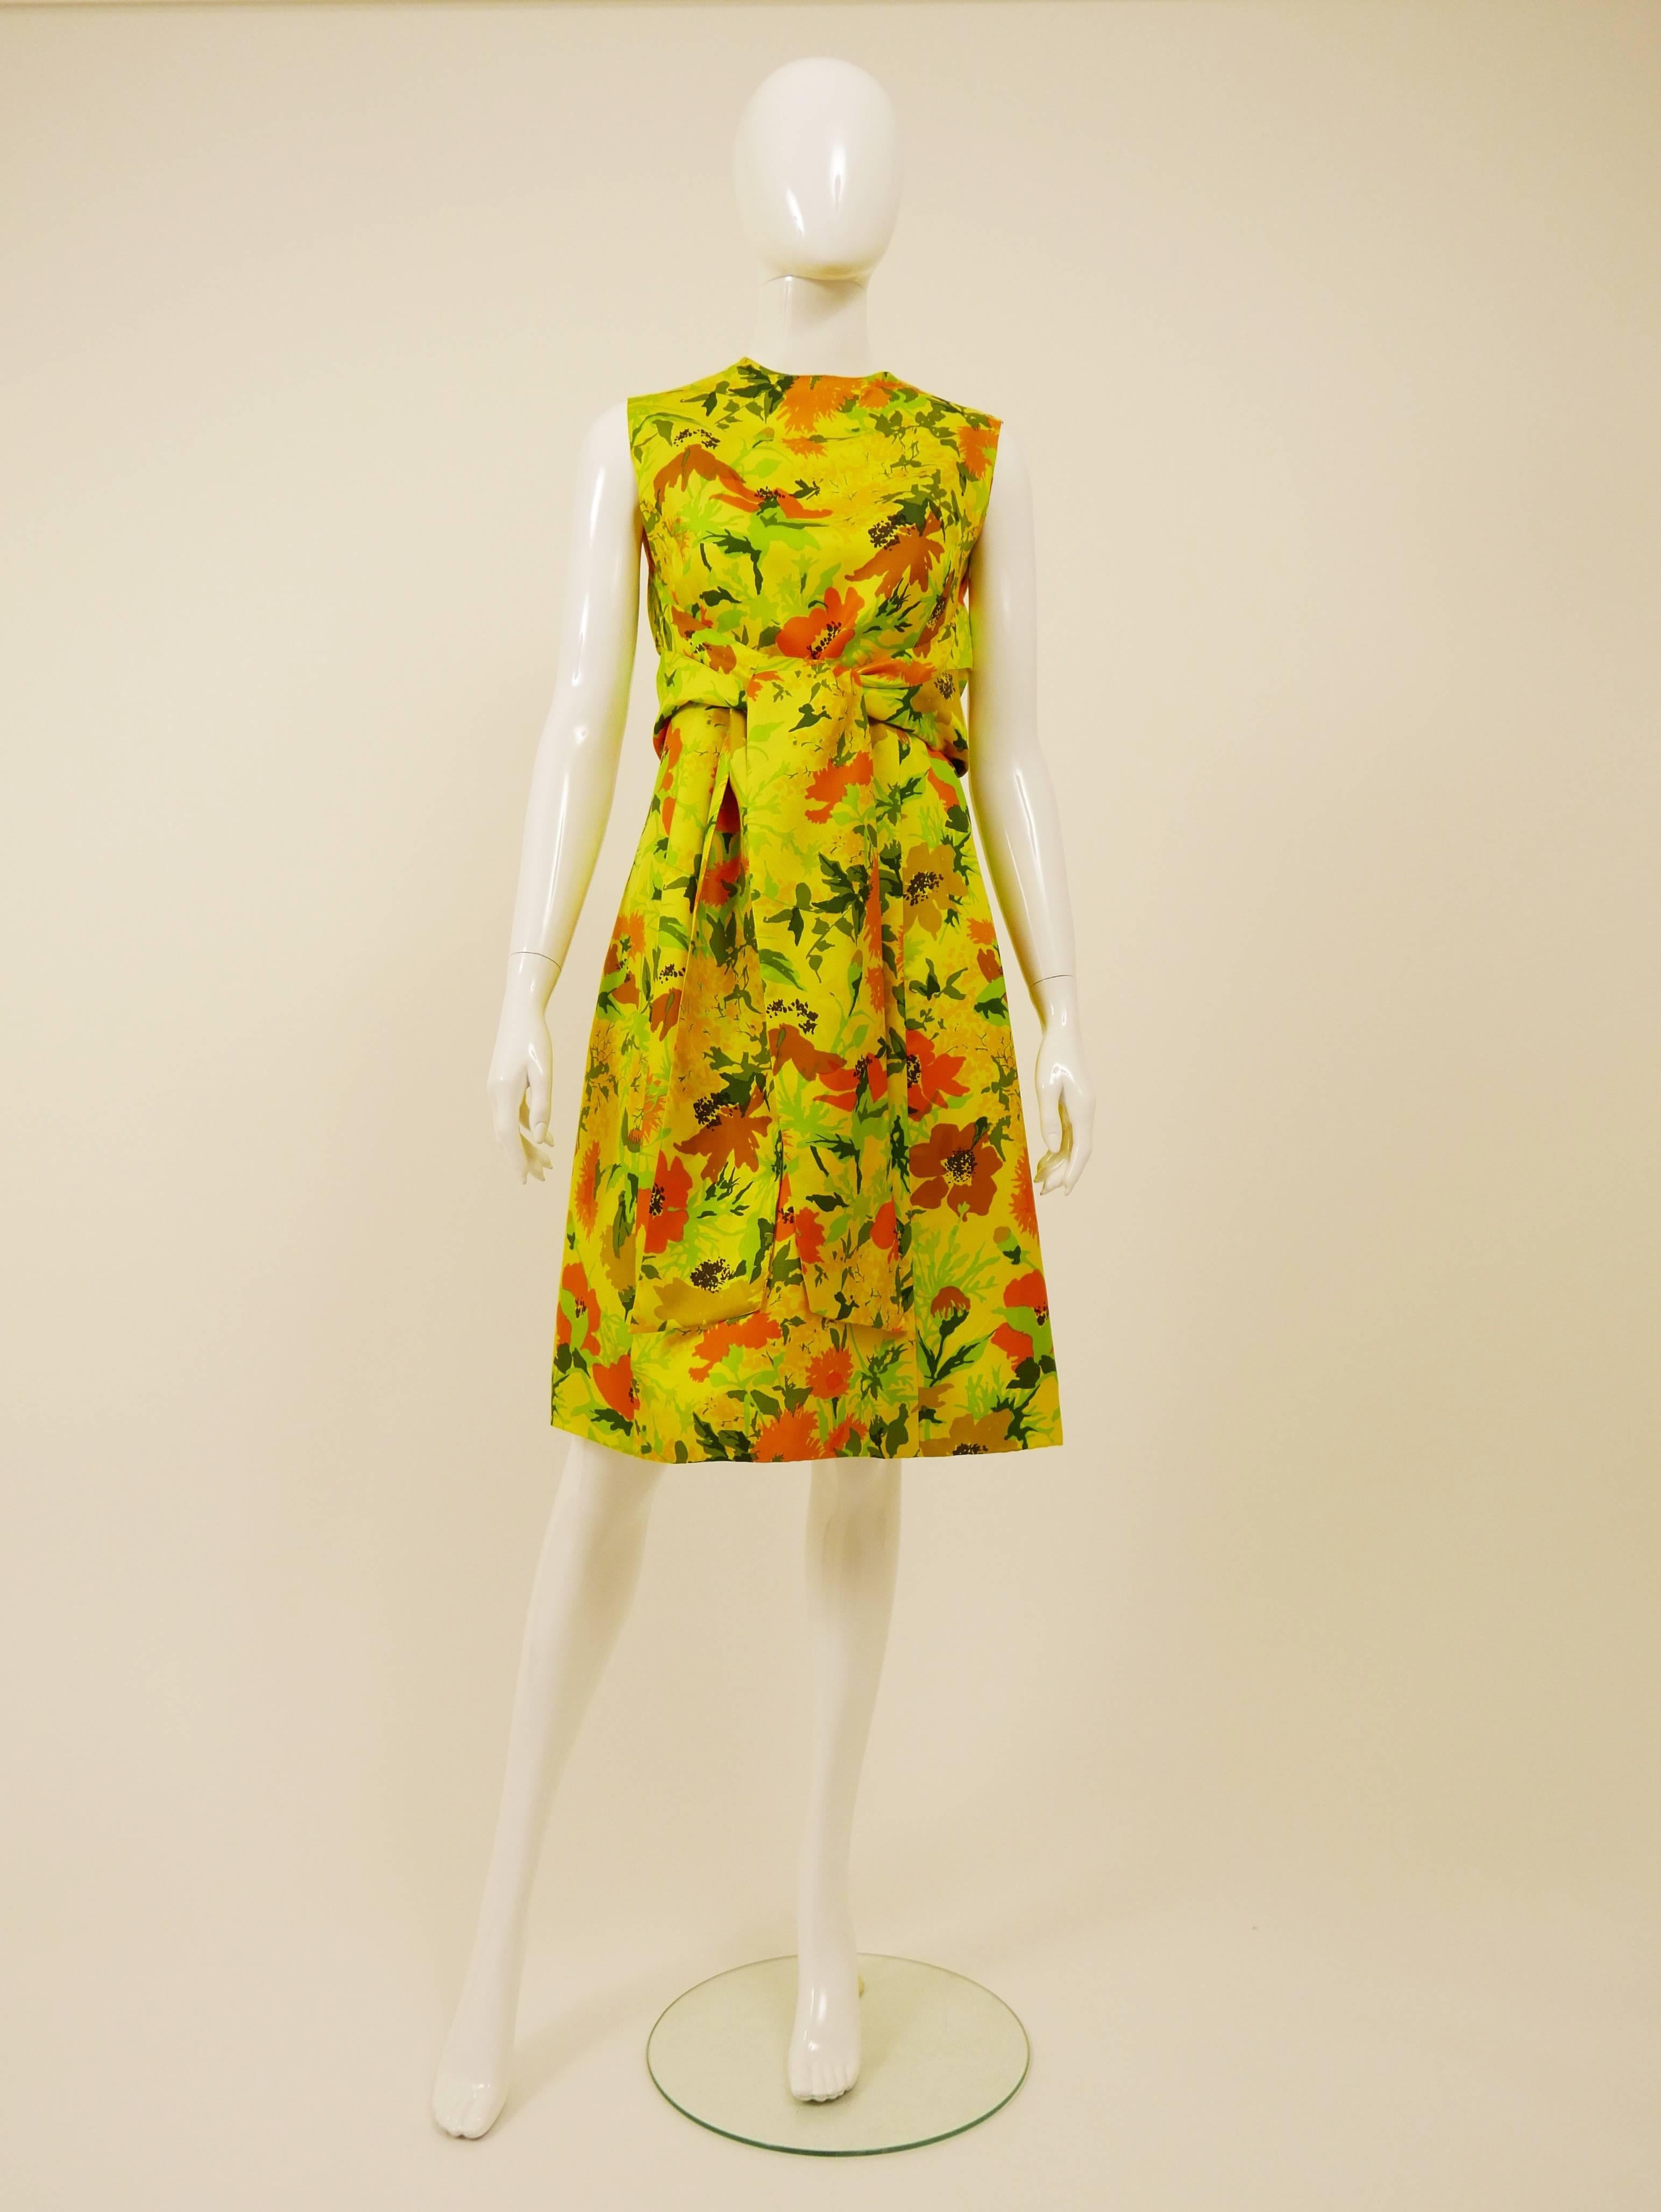 This lovely Italian tailored 1960s cocktail dress is in a yellow silk fabric with floral print. It has a sash belt bolero detail, A-line and back zip closure. It's fully lined.

Very good vintage condition
 
Label: N/A
Fabric: silk
Color: